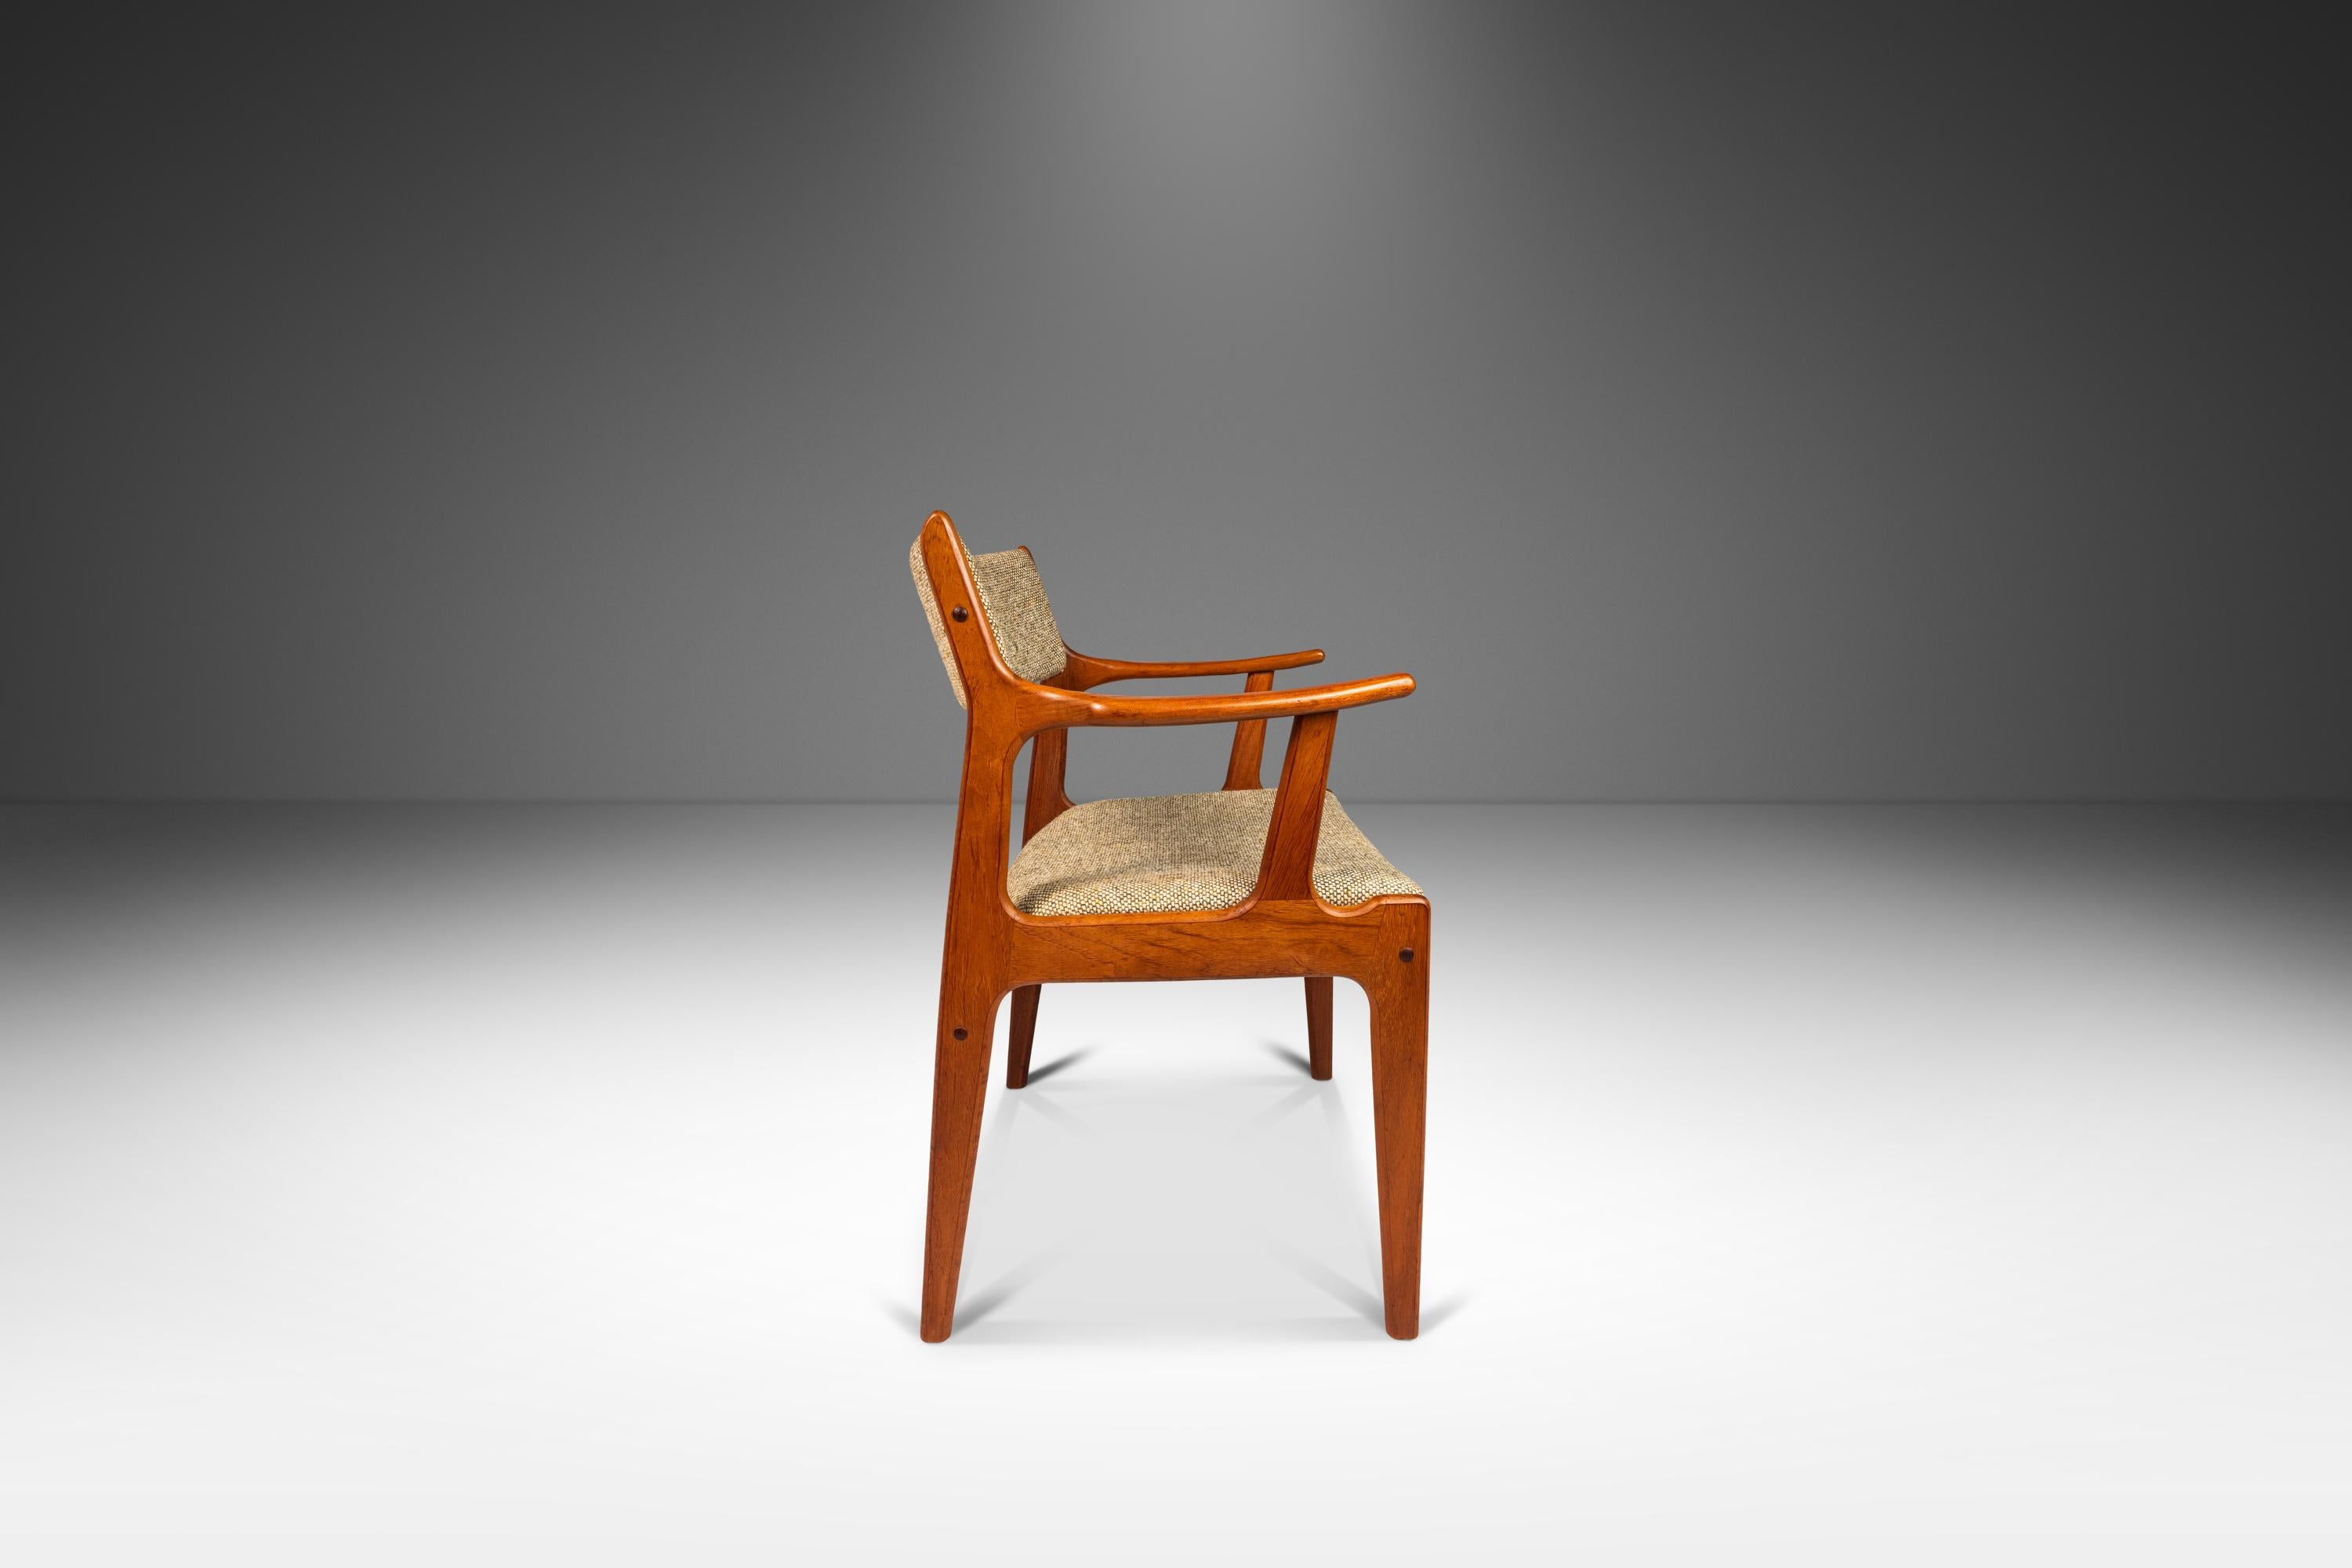 Danish Mid-Century Arm Chair in Solid Teak & Original Fabric by D-Scan, c. 1970s For Sale 4